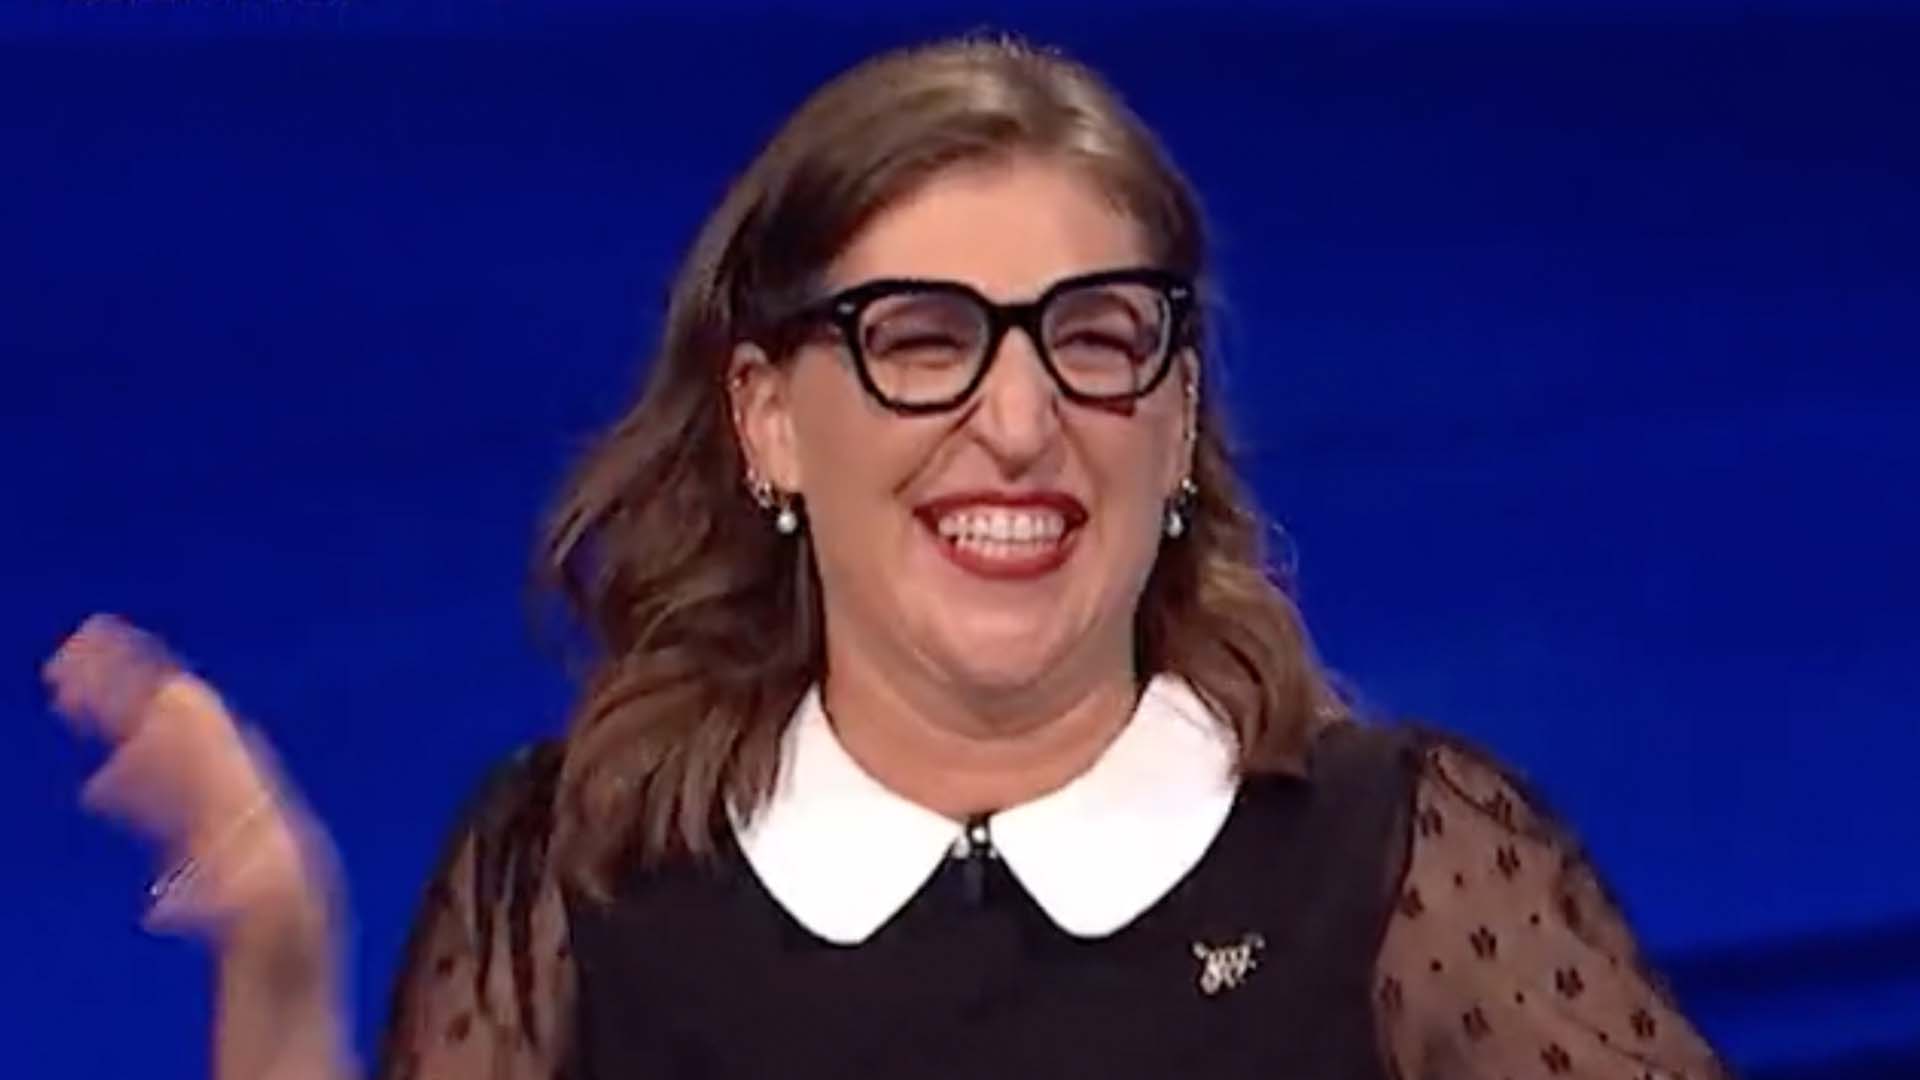 Celebrity Jeopardy!Mayim Bialik, a player who was ’embarrassed’ by the answer to the question, is left speechless